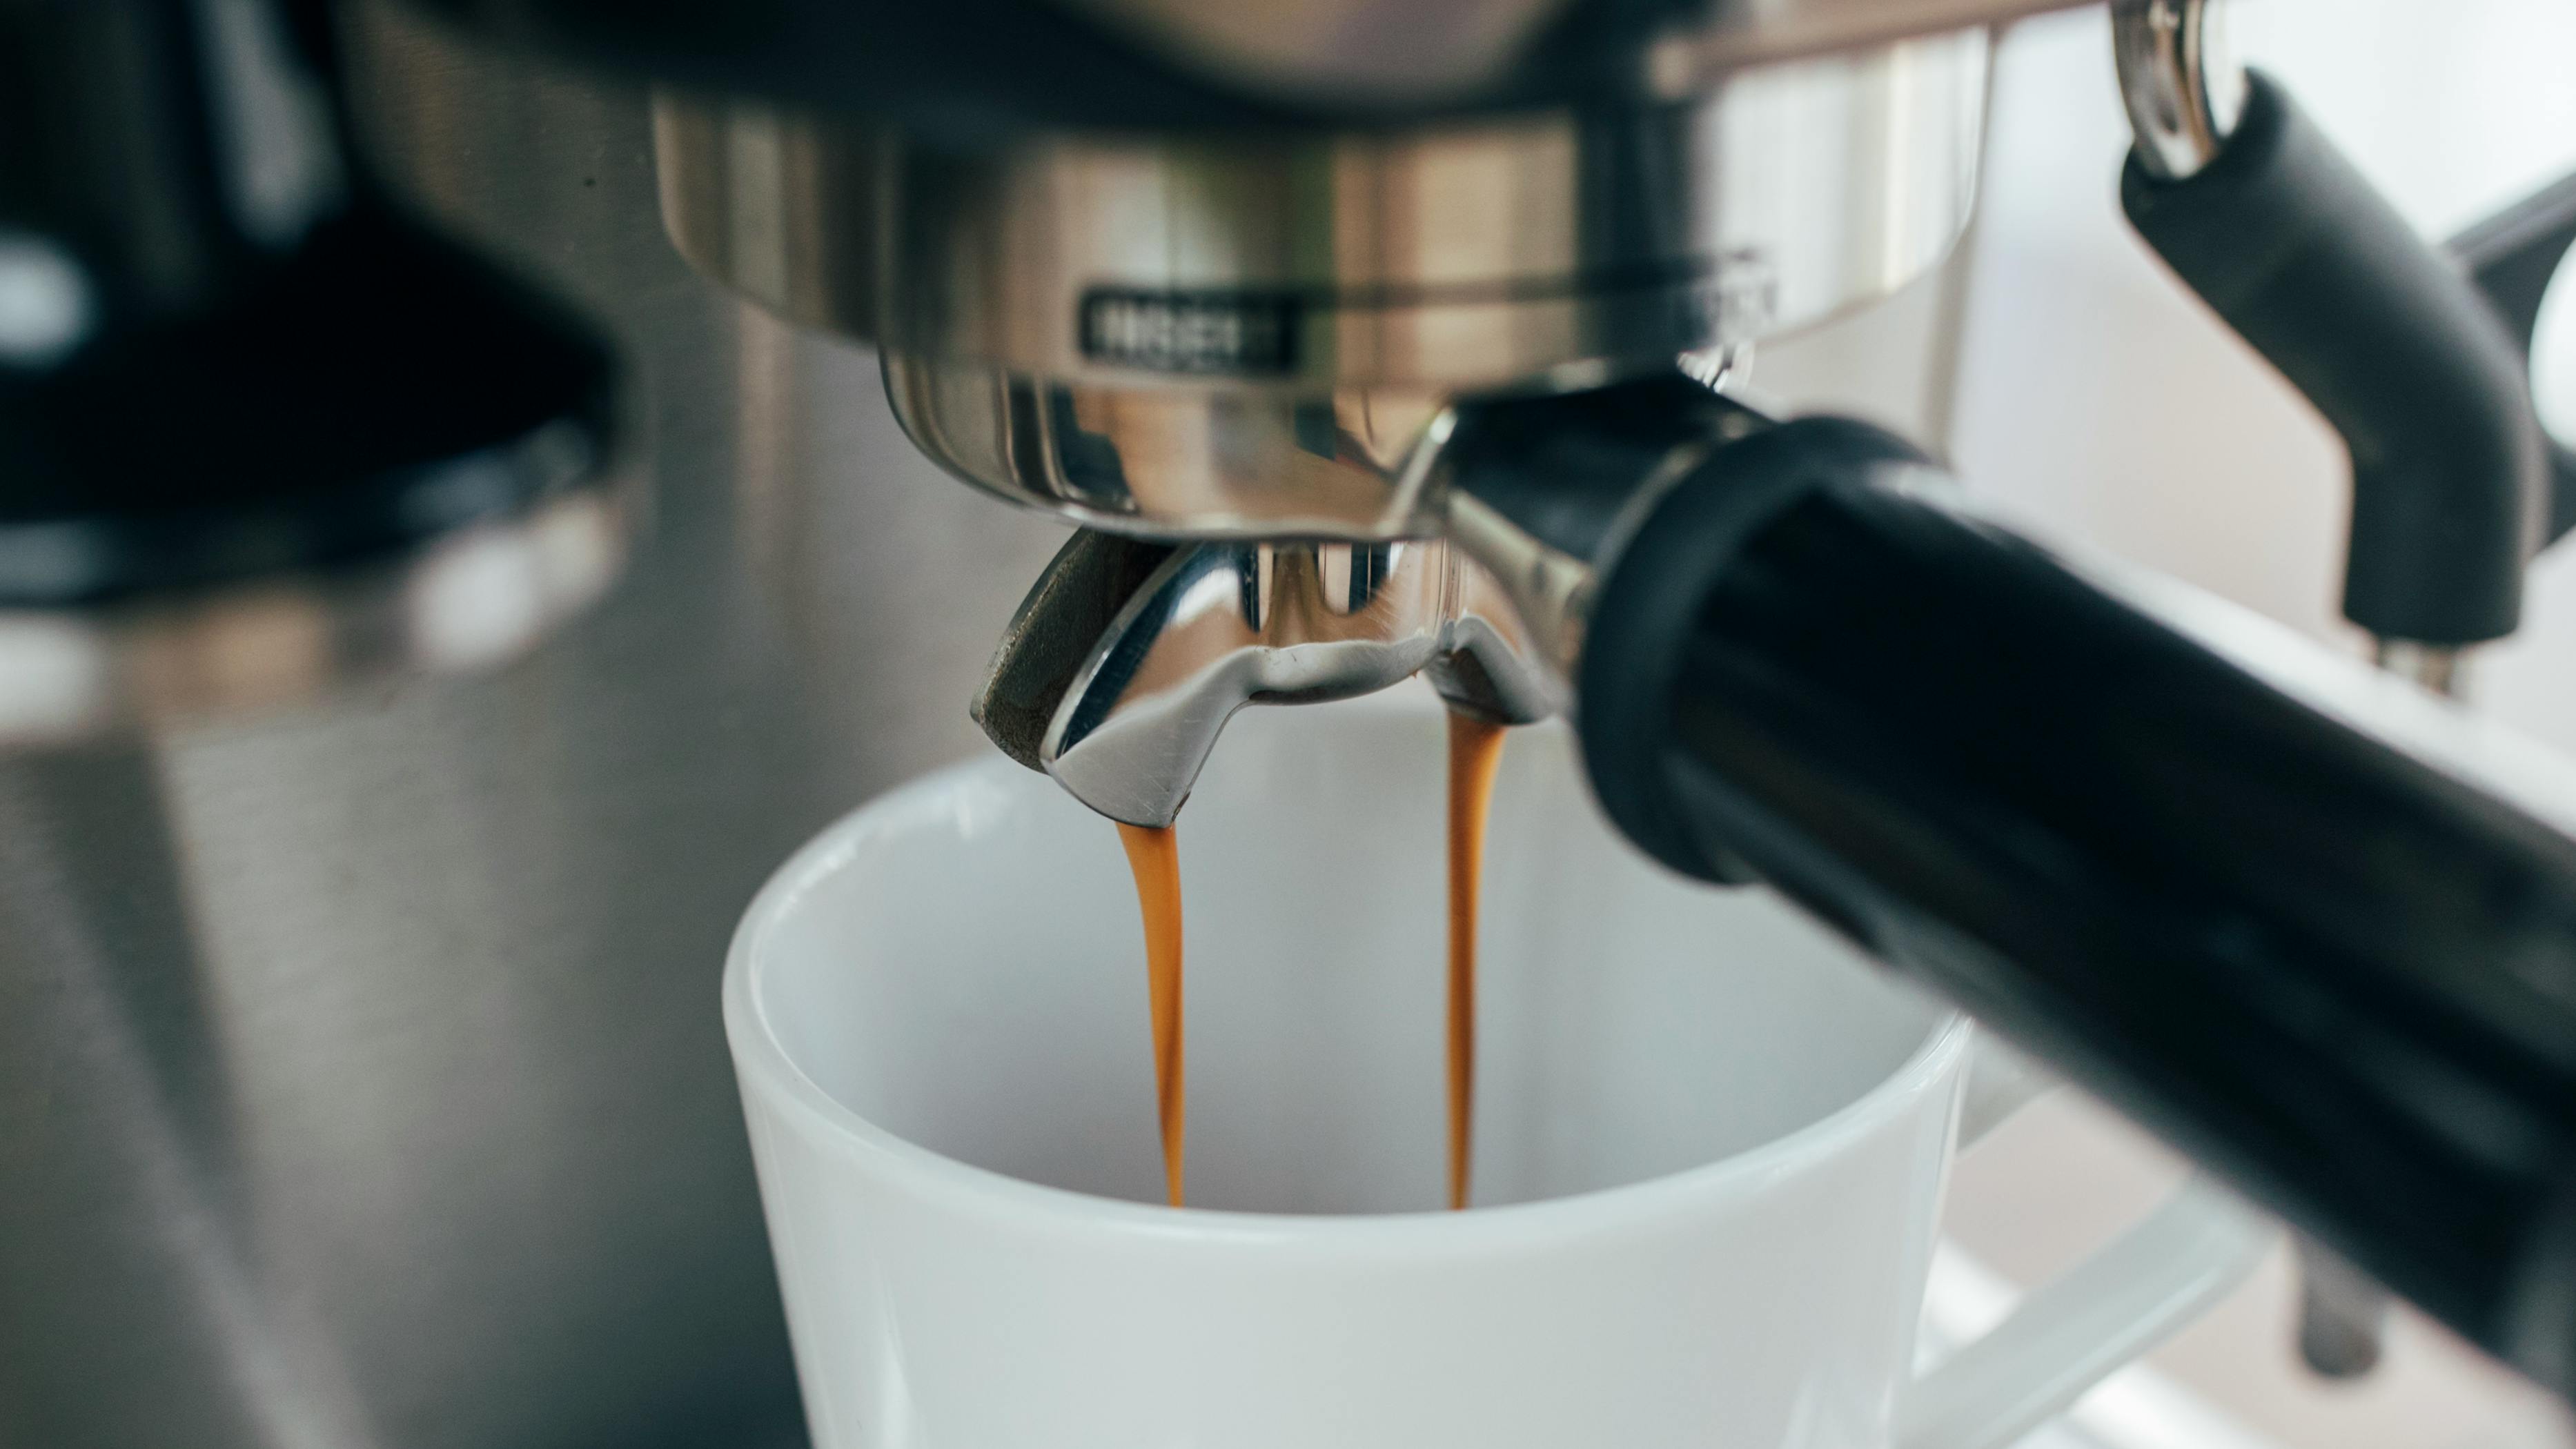 A cup of espresso being made with an espresso machine